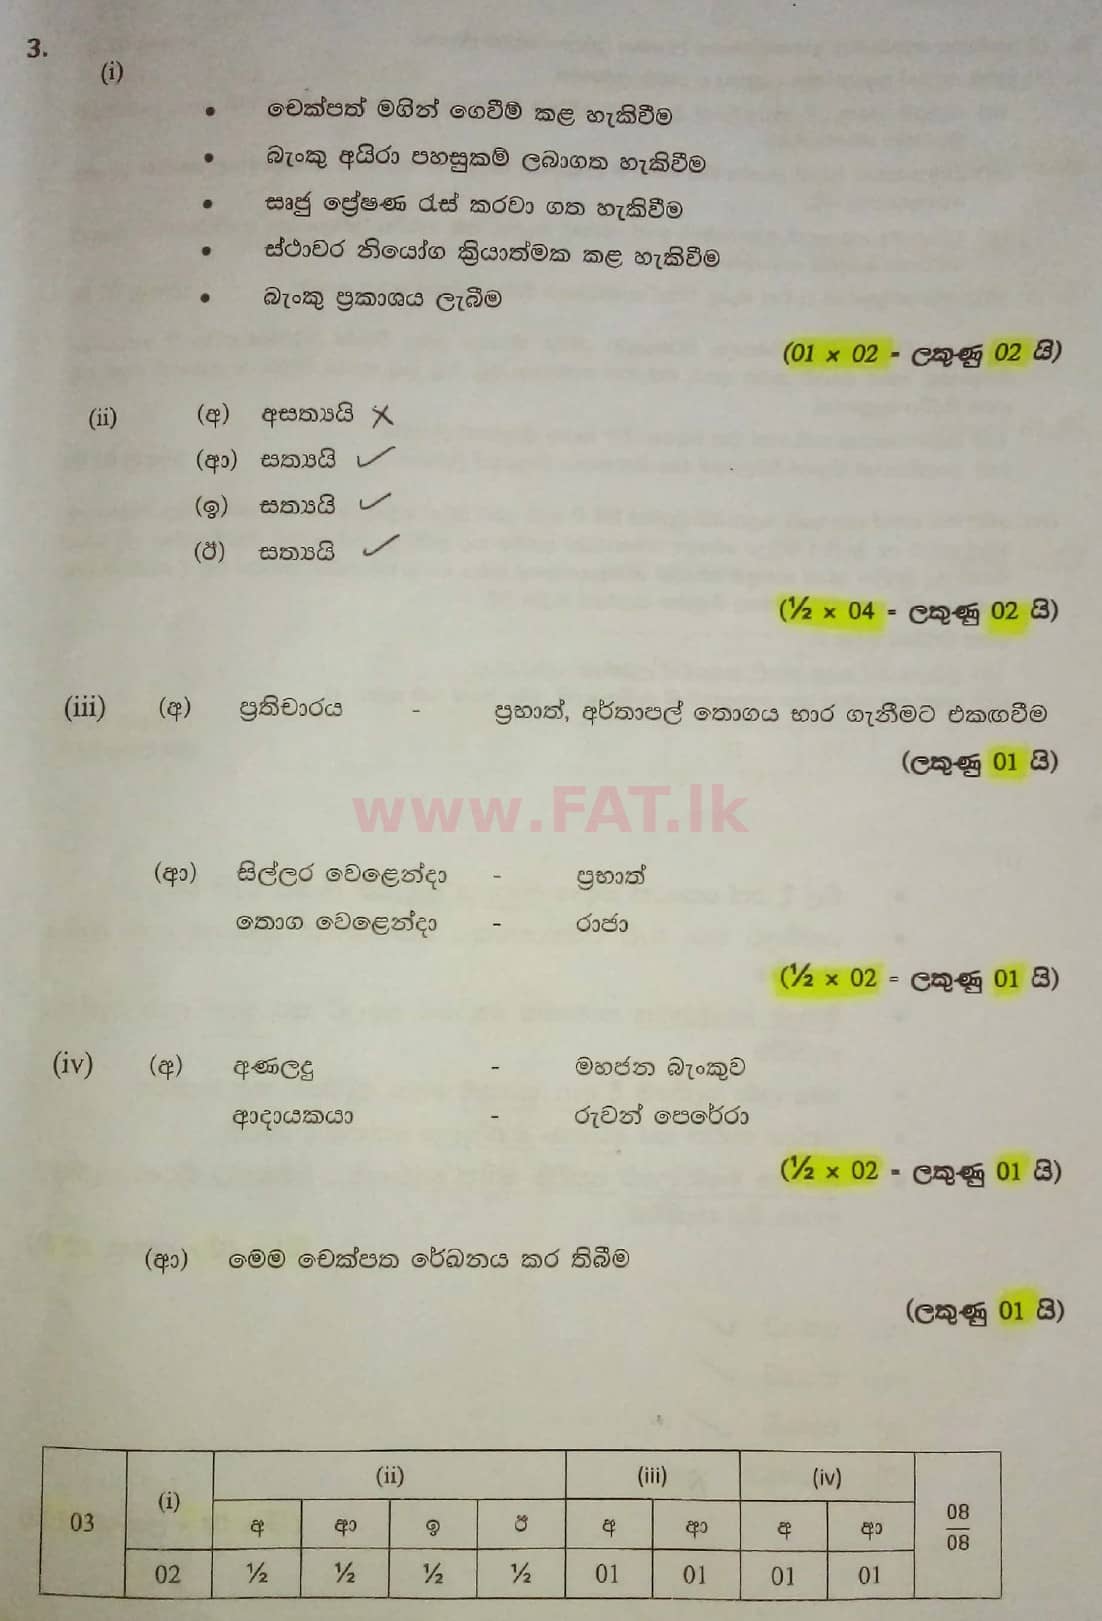 National Syllabus : Ordinary Level (O/L) Business and Accounting Studies - 2021 May - Paper II (සිංහල Medium) 3 5816